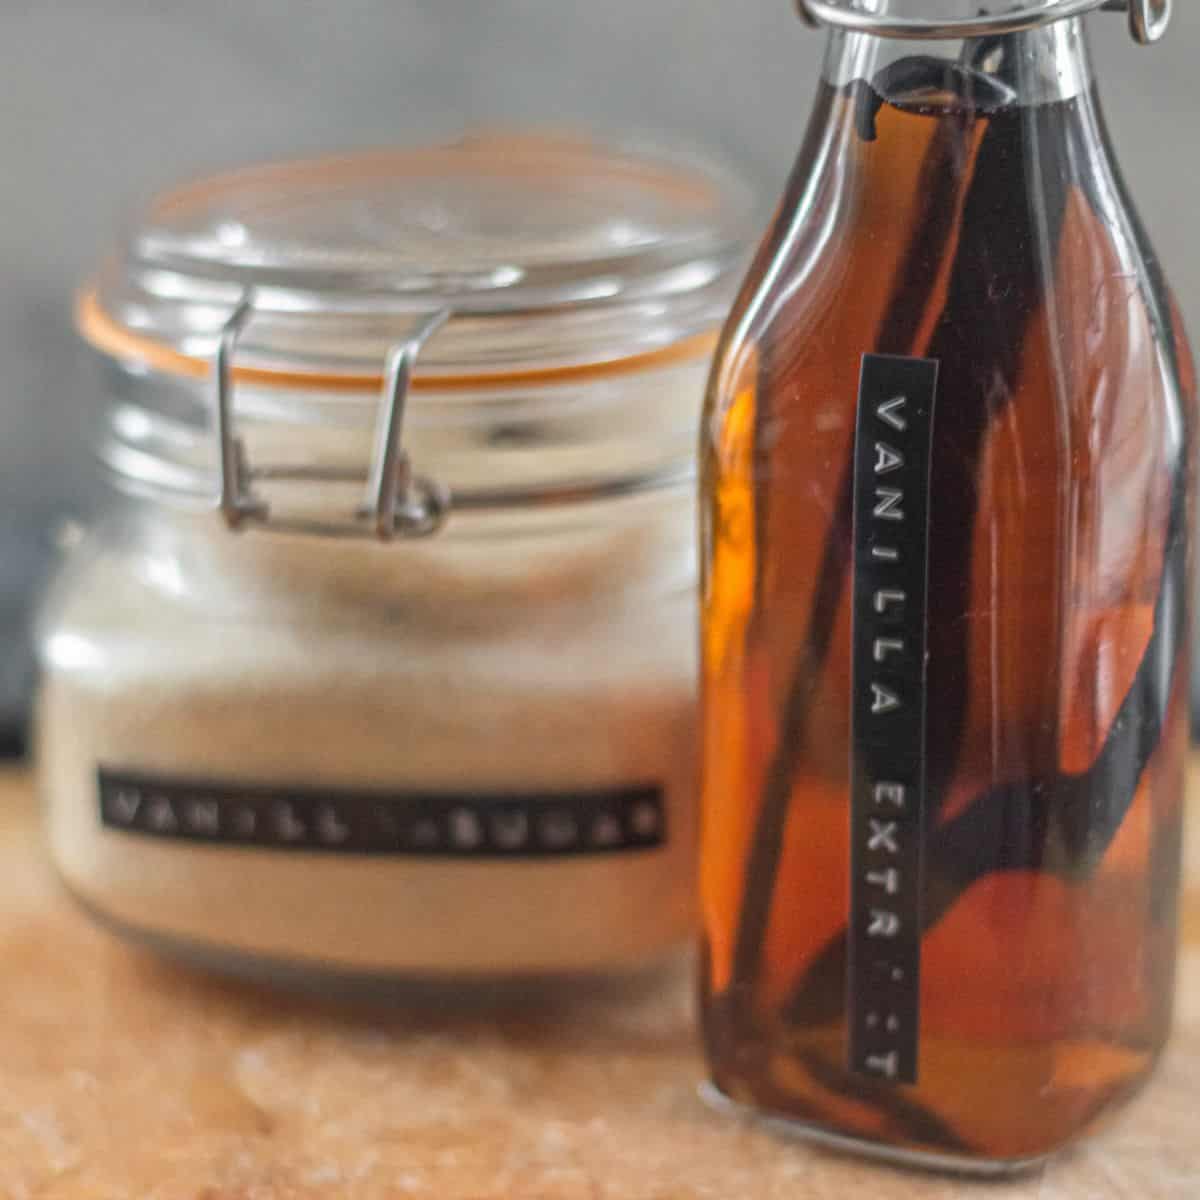 How to make your own Vanilla Extract in less than 2 minutes!